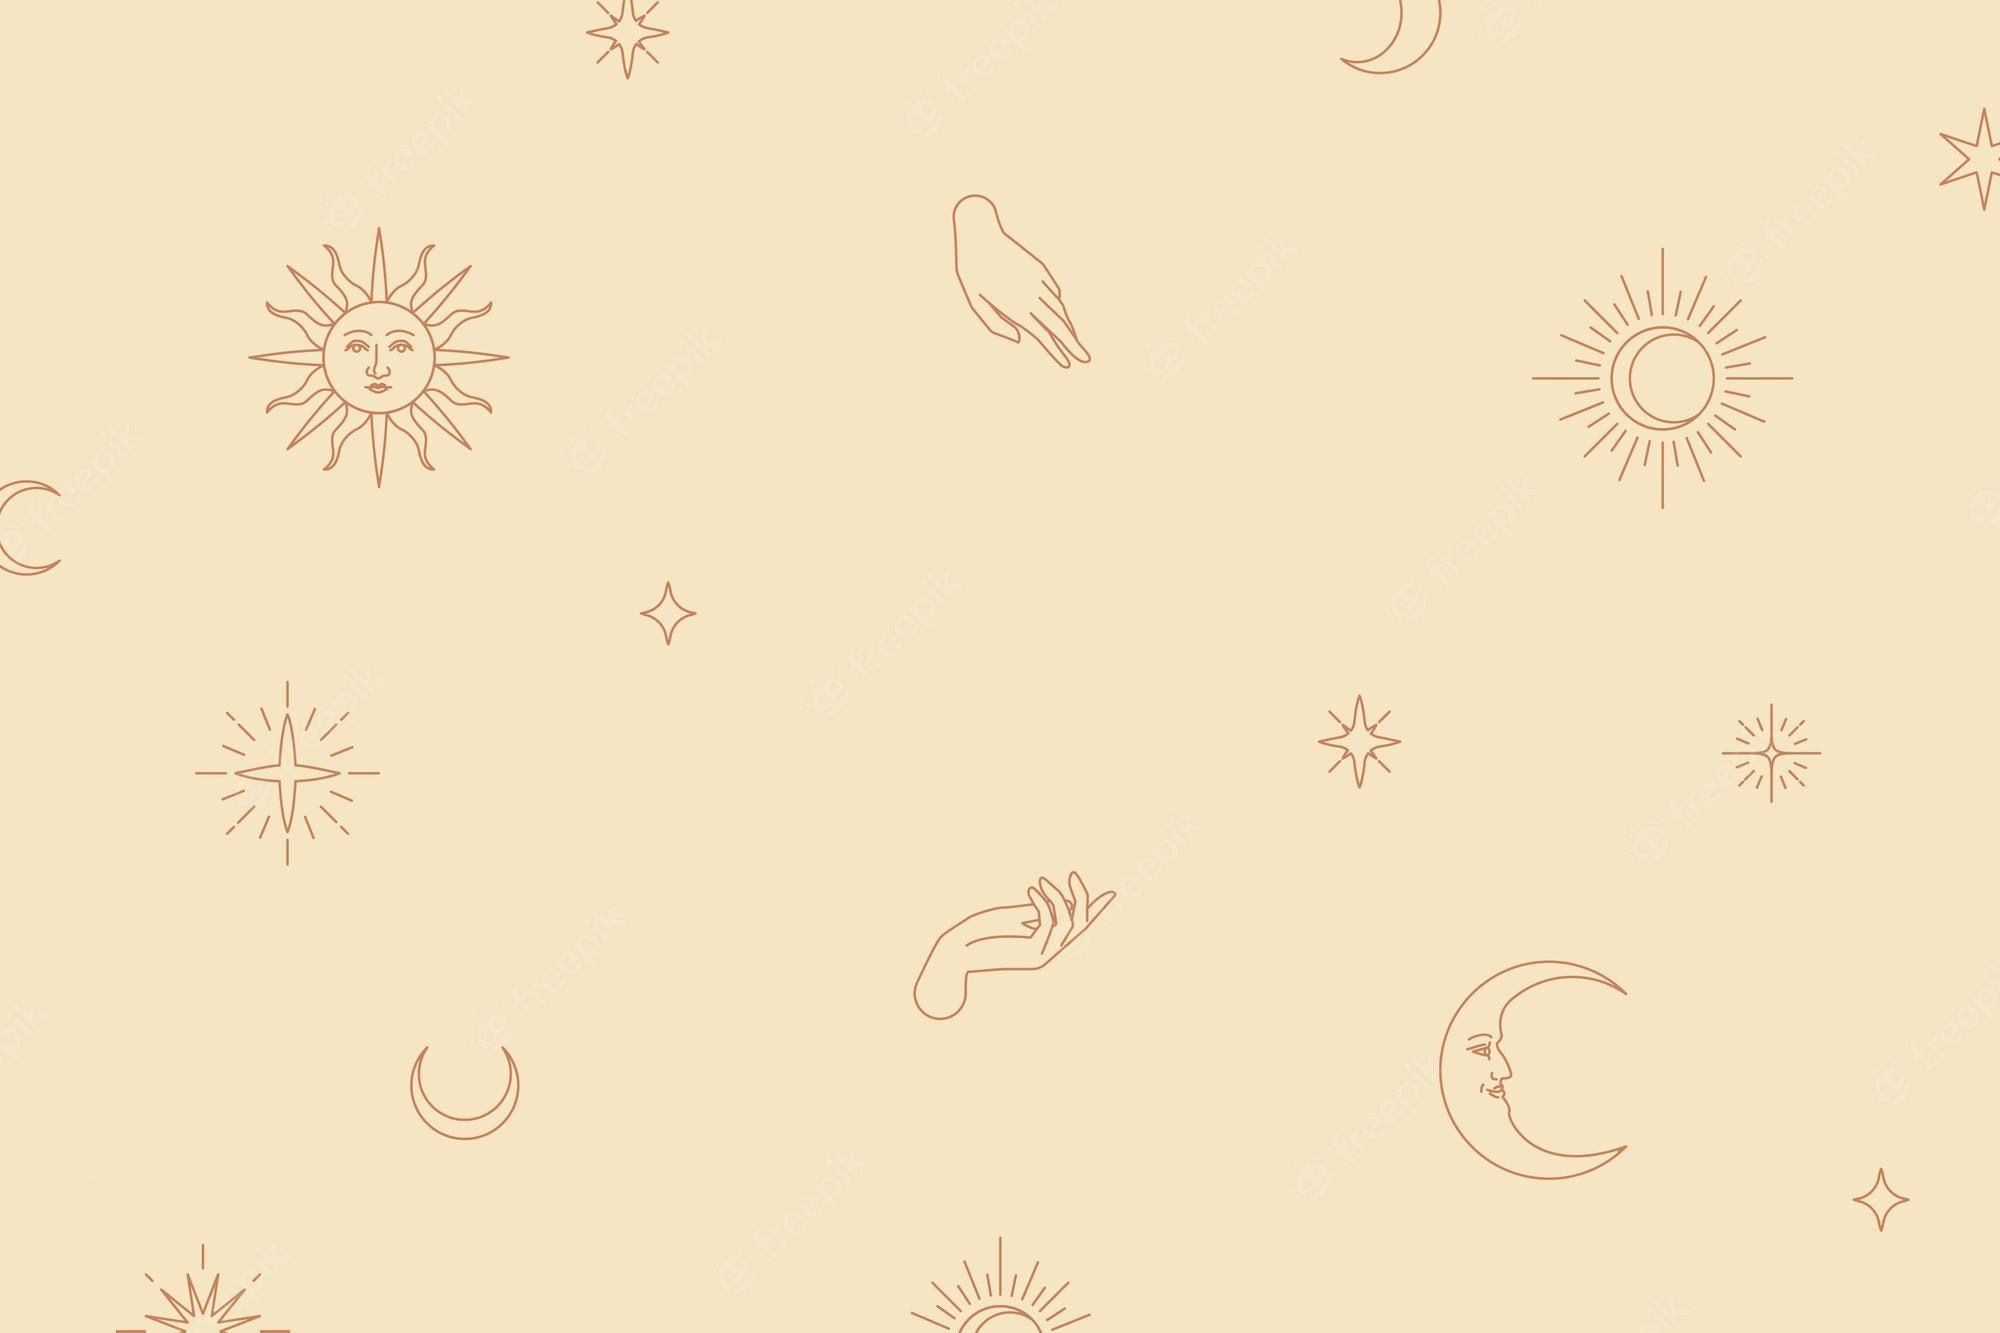 A pattern of celestial objects and symbols - Cute